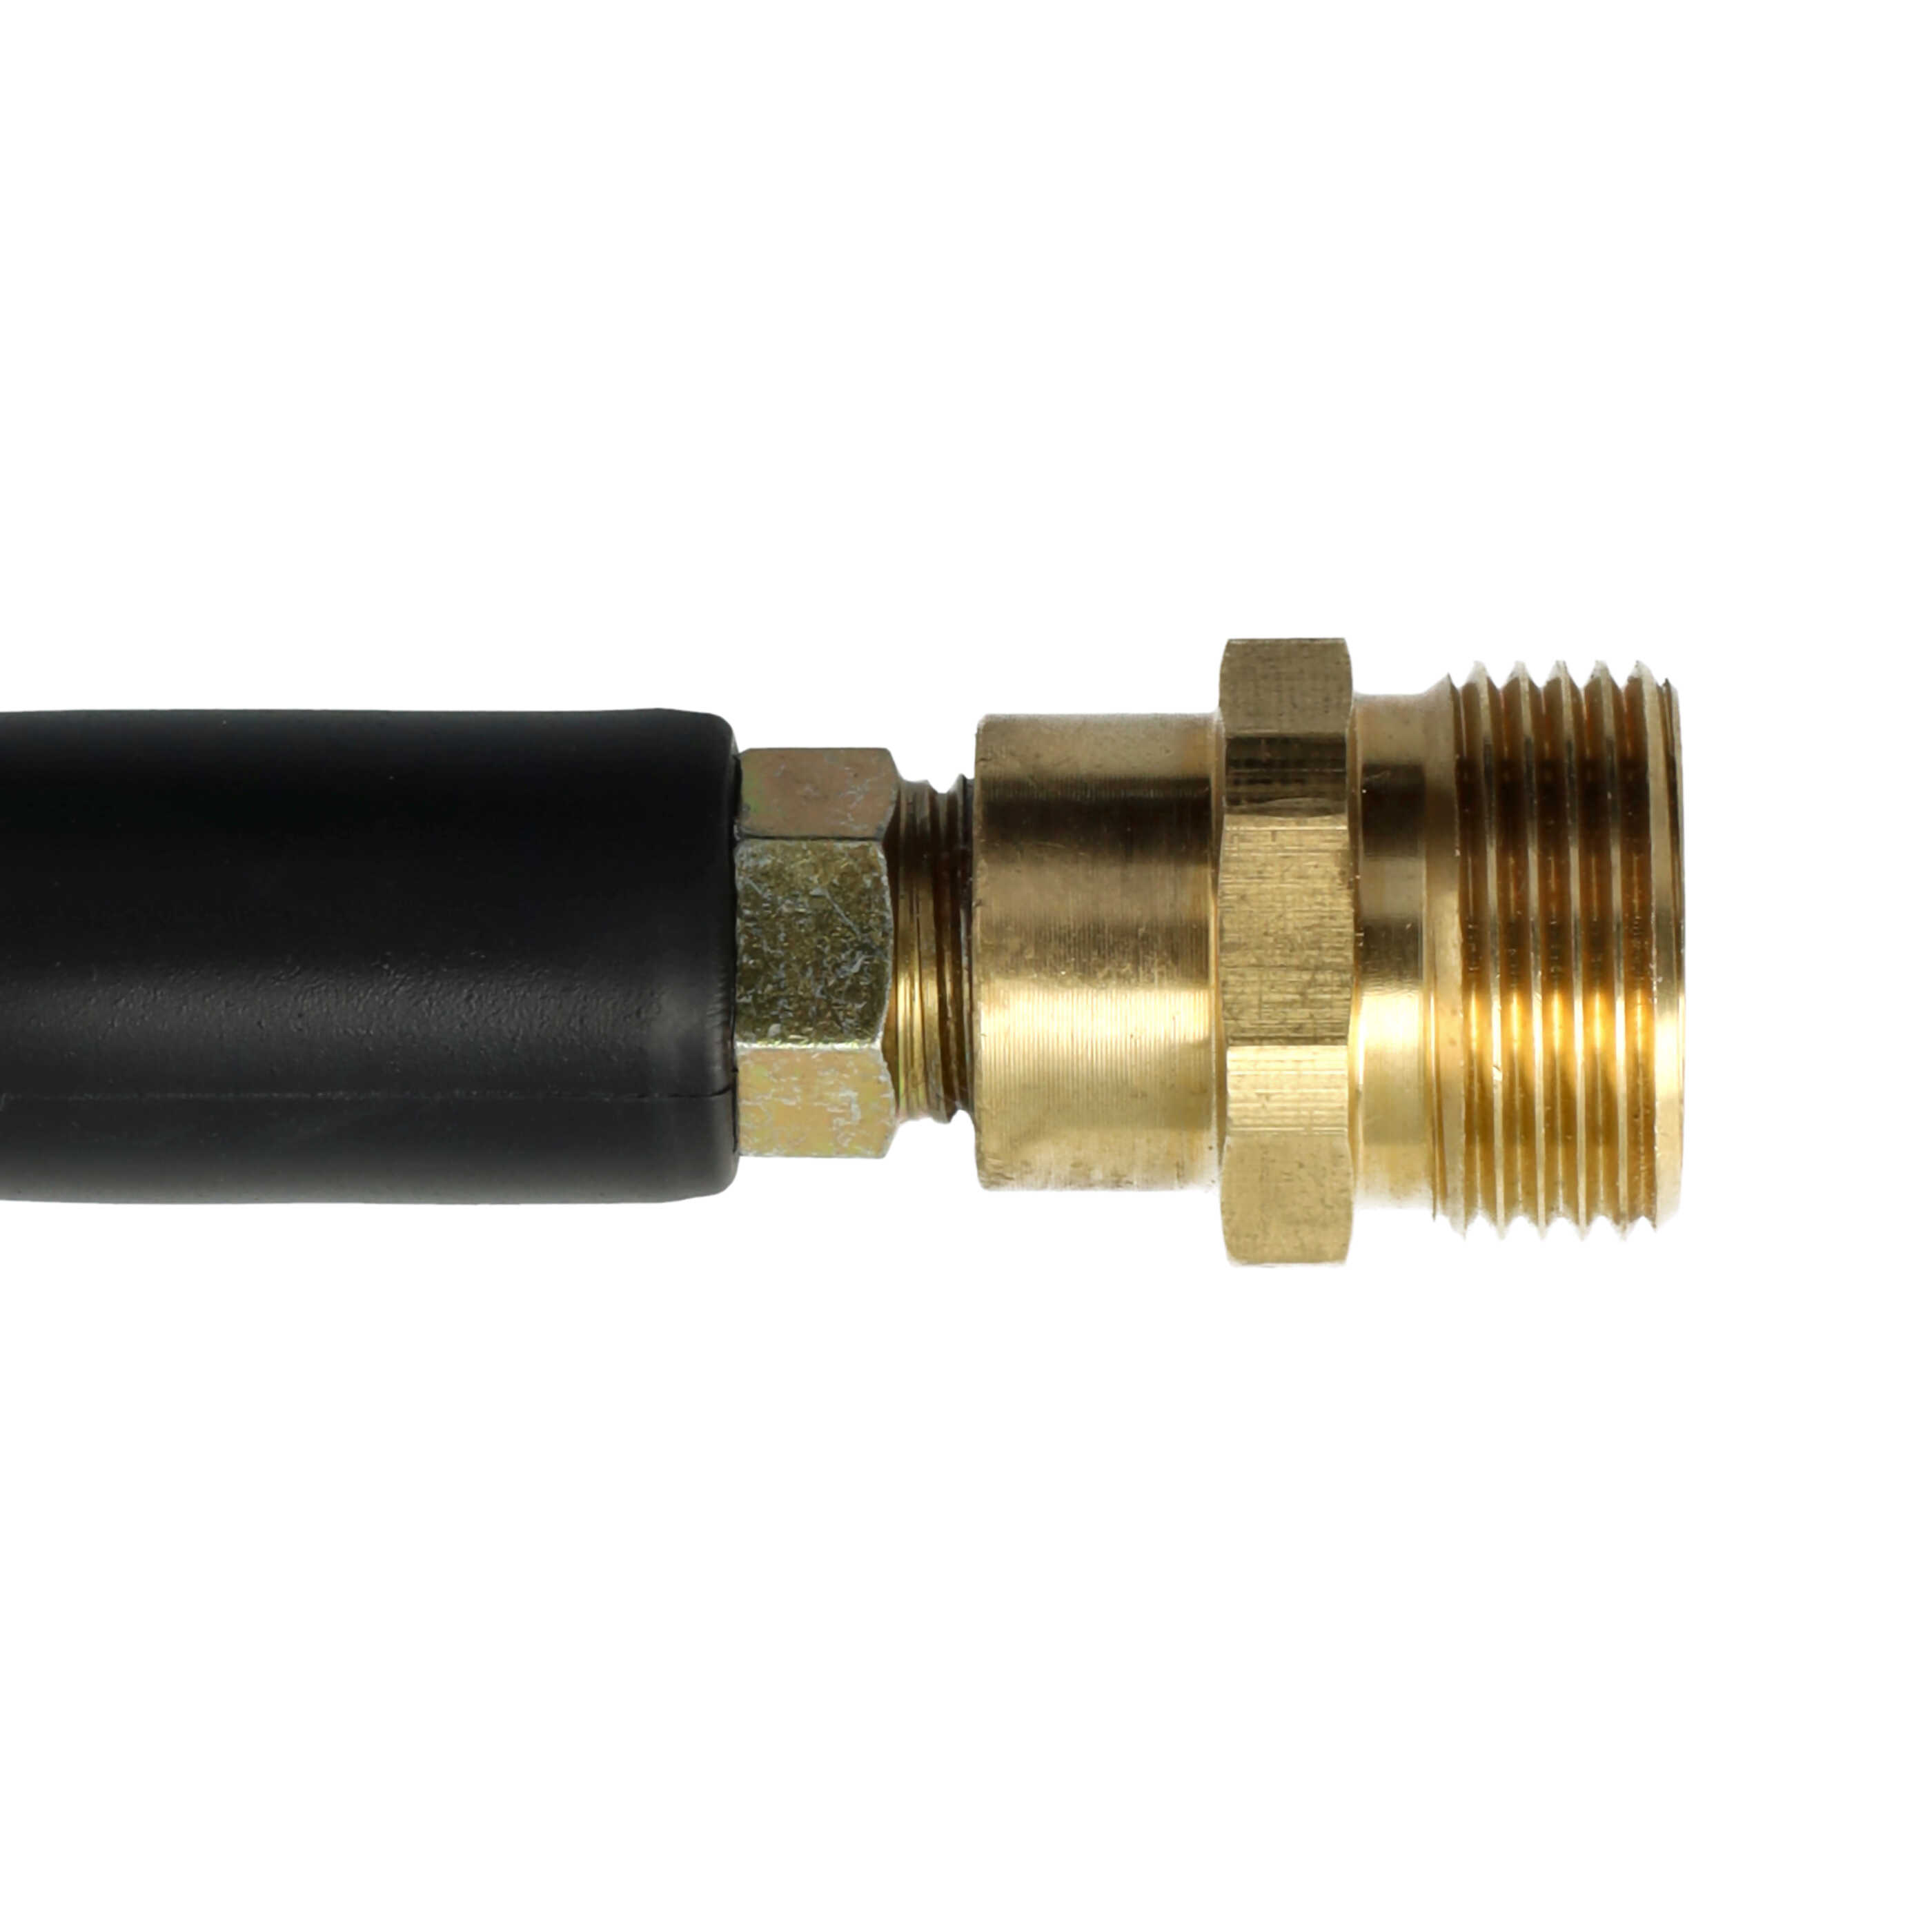 vhbw 3 m Extension Hose High-Pressure Cleaner with M22 x 1.5 Threaded Connection Black